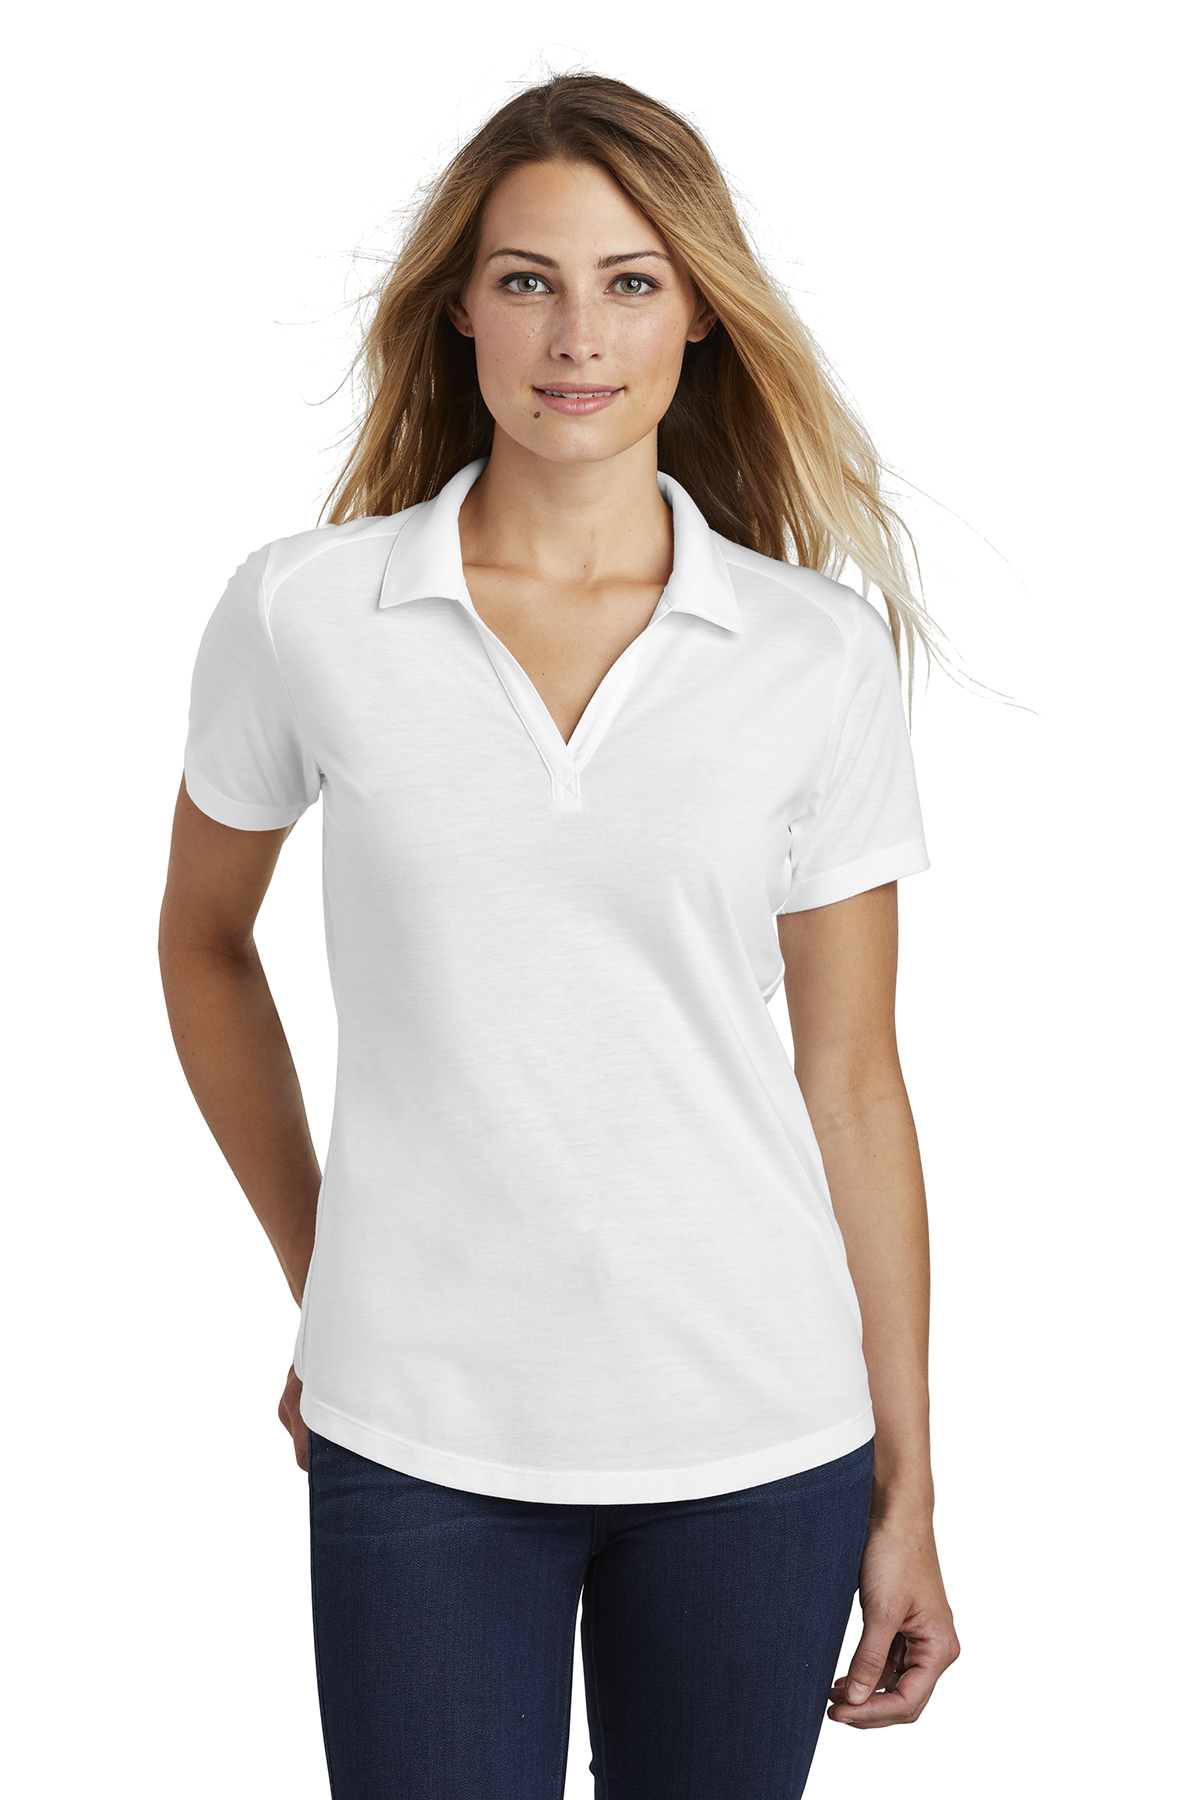 Custom Embroidered  Sport-Tek  Ladies PosiCharge  Tri-Blend Wicking Polo 4in x 4in Embroidery Included Kleding Dameskleding Tops & T-shirts Polos Custom Gift Personalized Shirt 